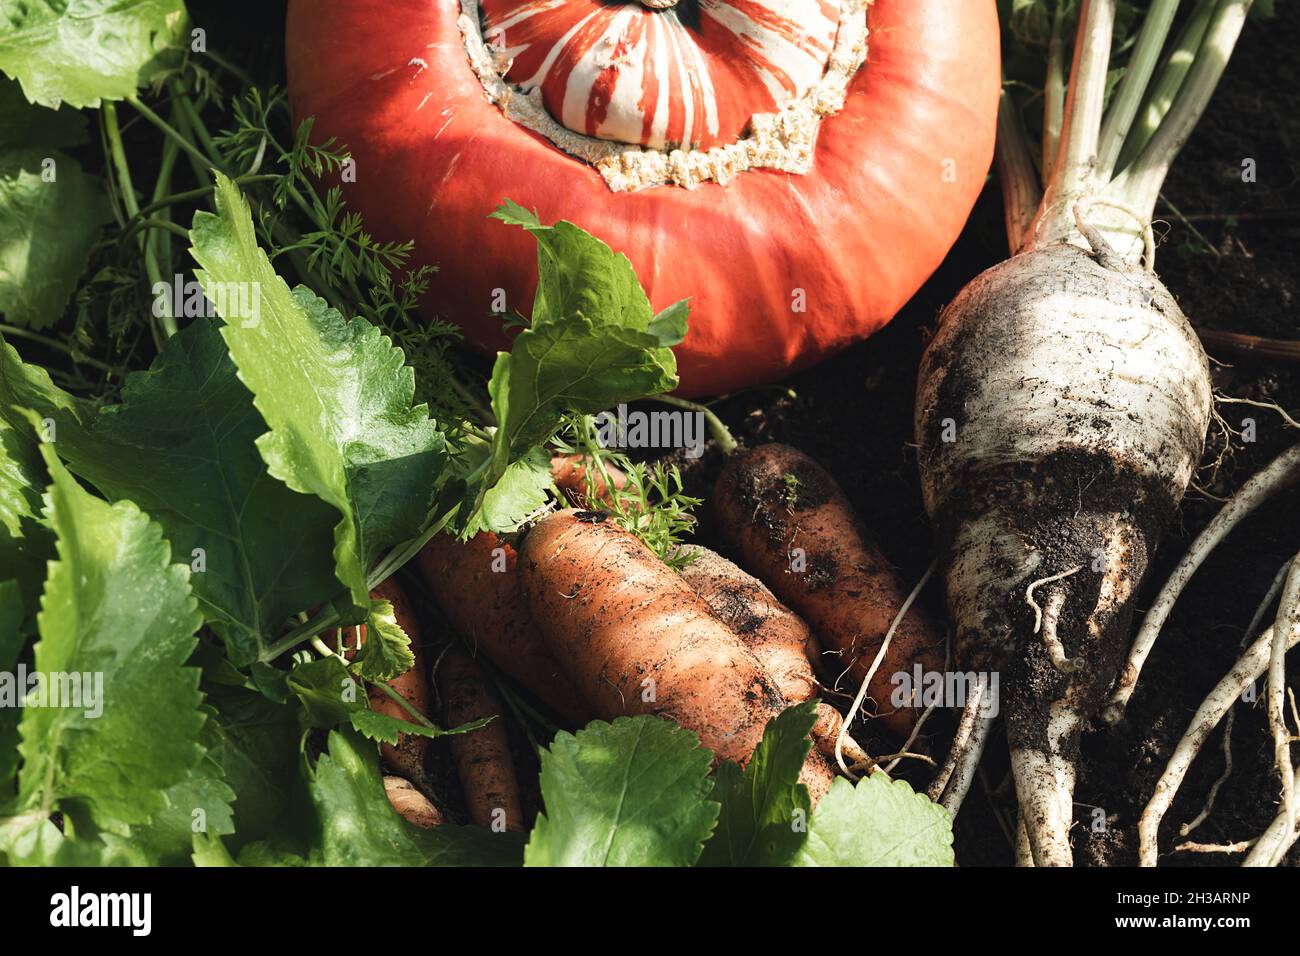 Carrots, parsnips and pumpkin, harvesting in autumn, gardening and healthy eating concept Stock Photo